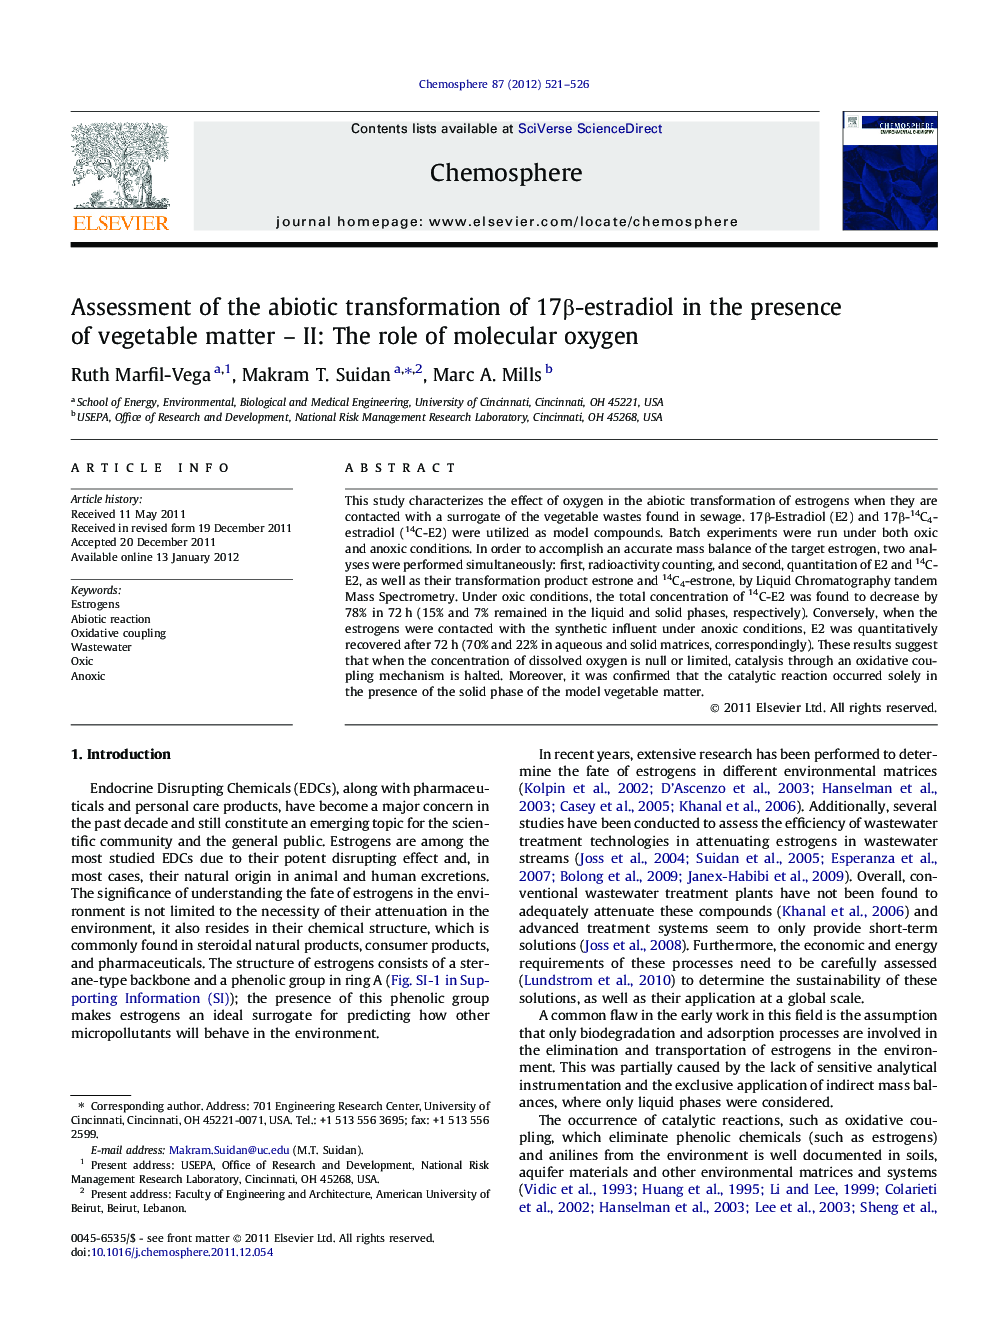 Assessment of the abiotic transformation of 17β-estradiol in the presence of vegetable matter – II: The role of molecular oxygen